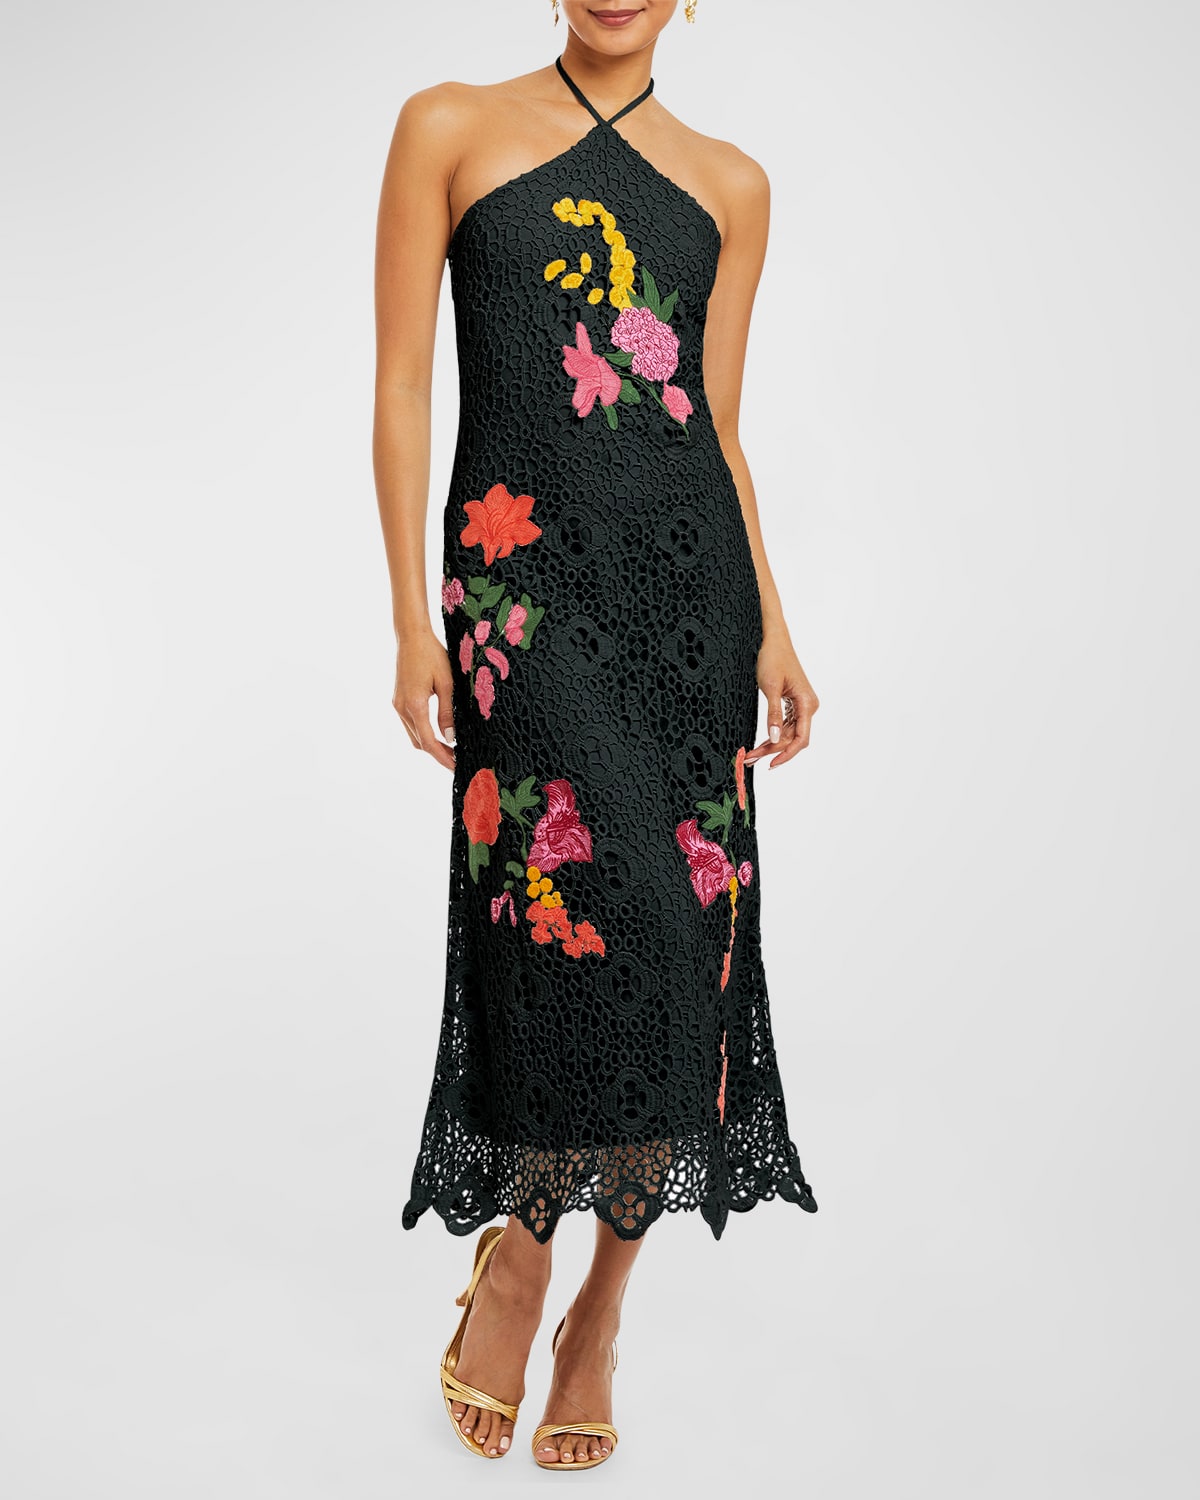 MESTIZA NEW YORK CROCHET LACE HALTER MIDI DRESS WITH EMBROIDERED FLOWERS